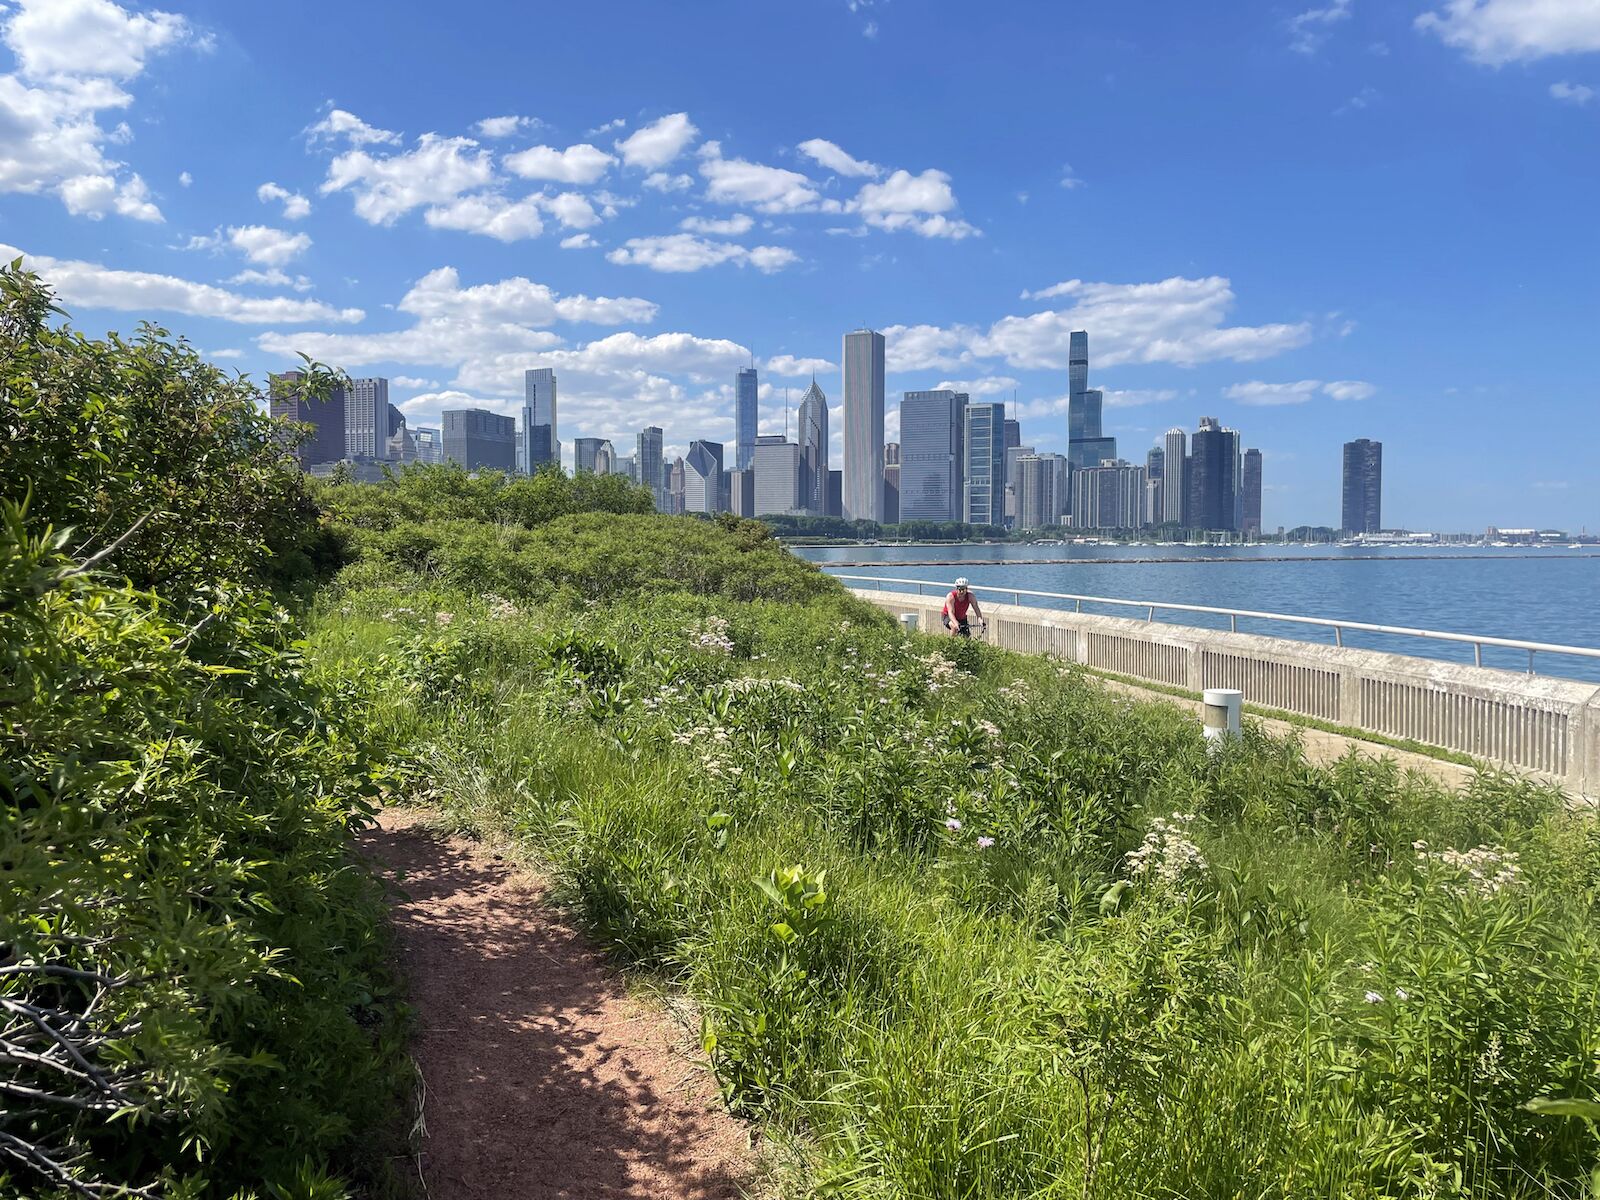 hiking near chicago - lakefront trail in the city